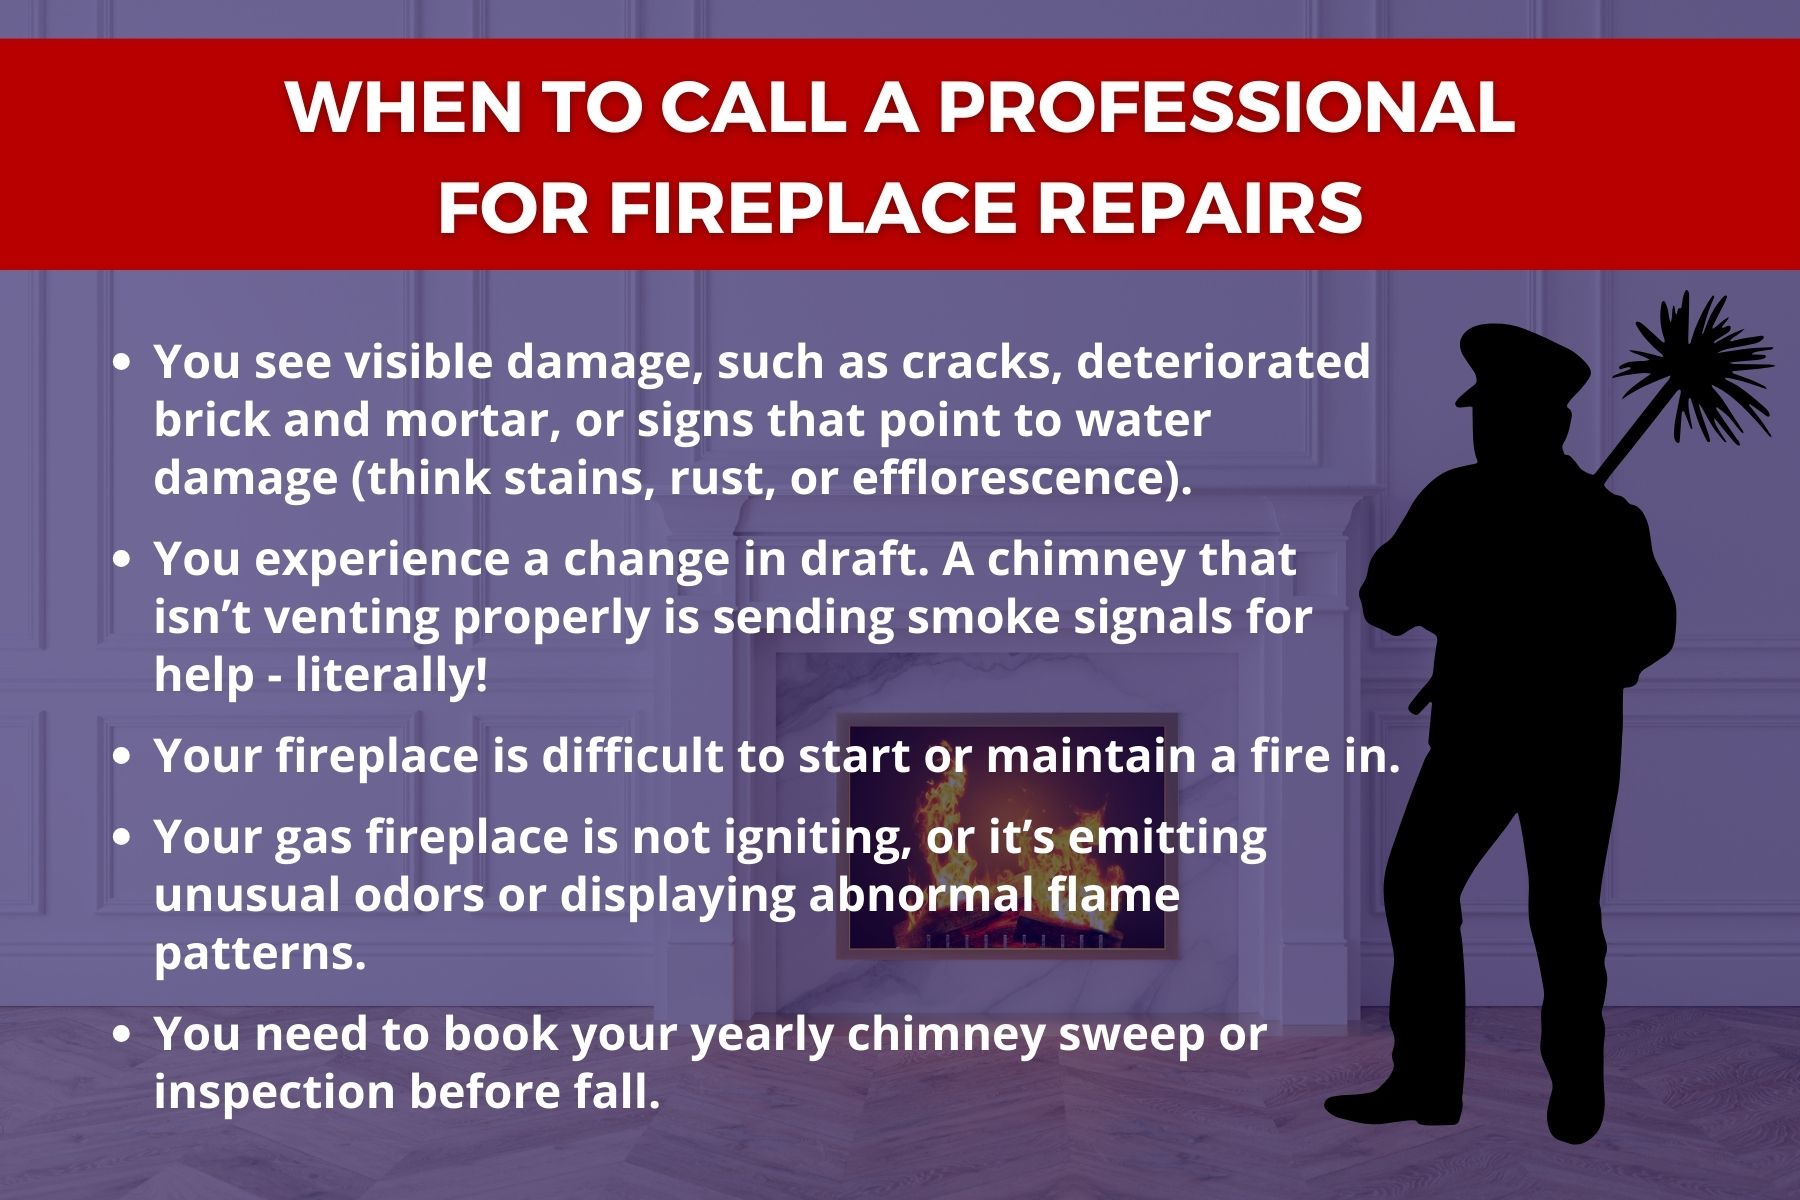 original infographic stating when to call a professional for fireplace repairs